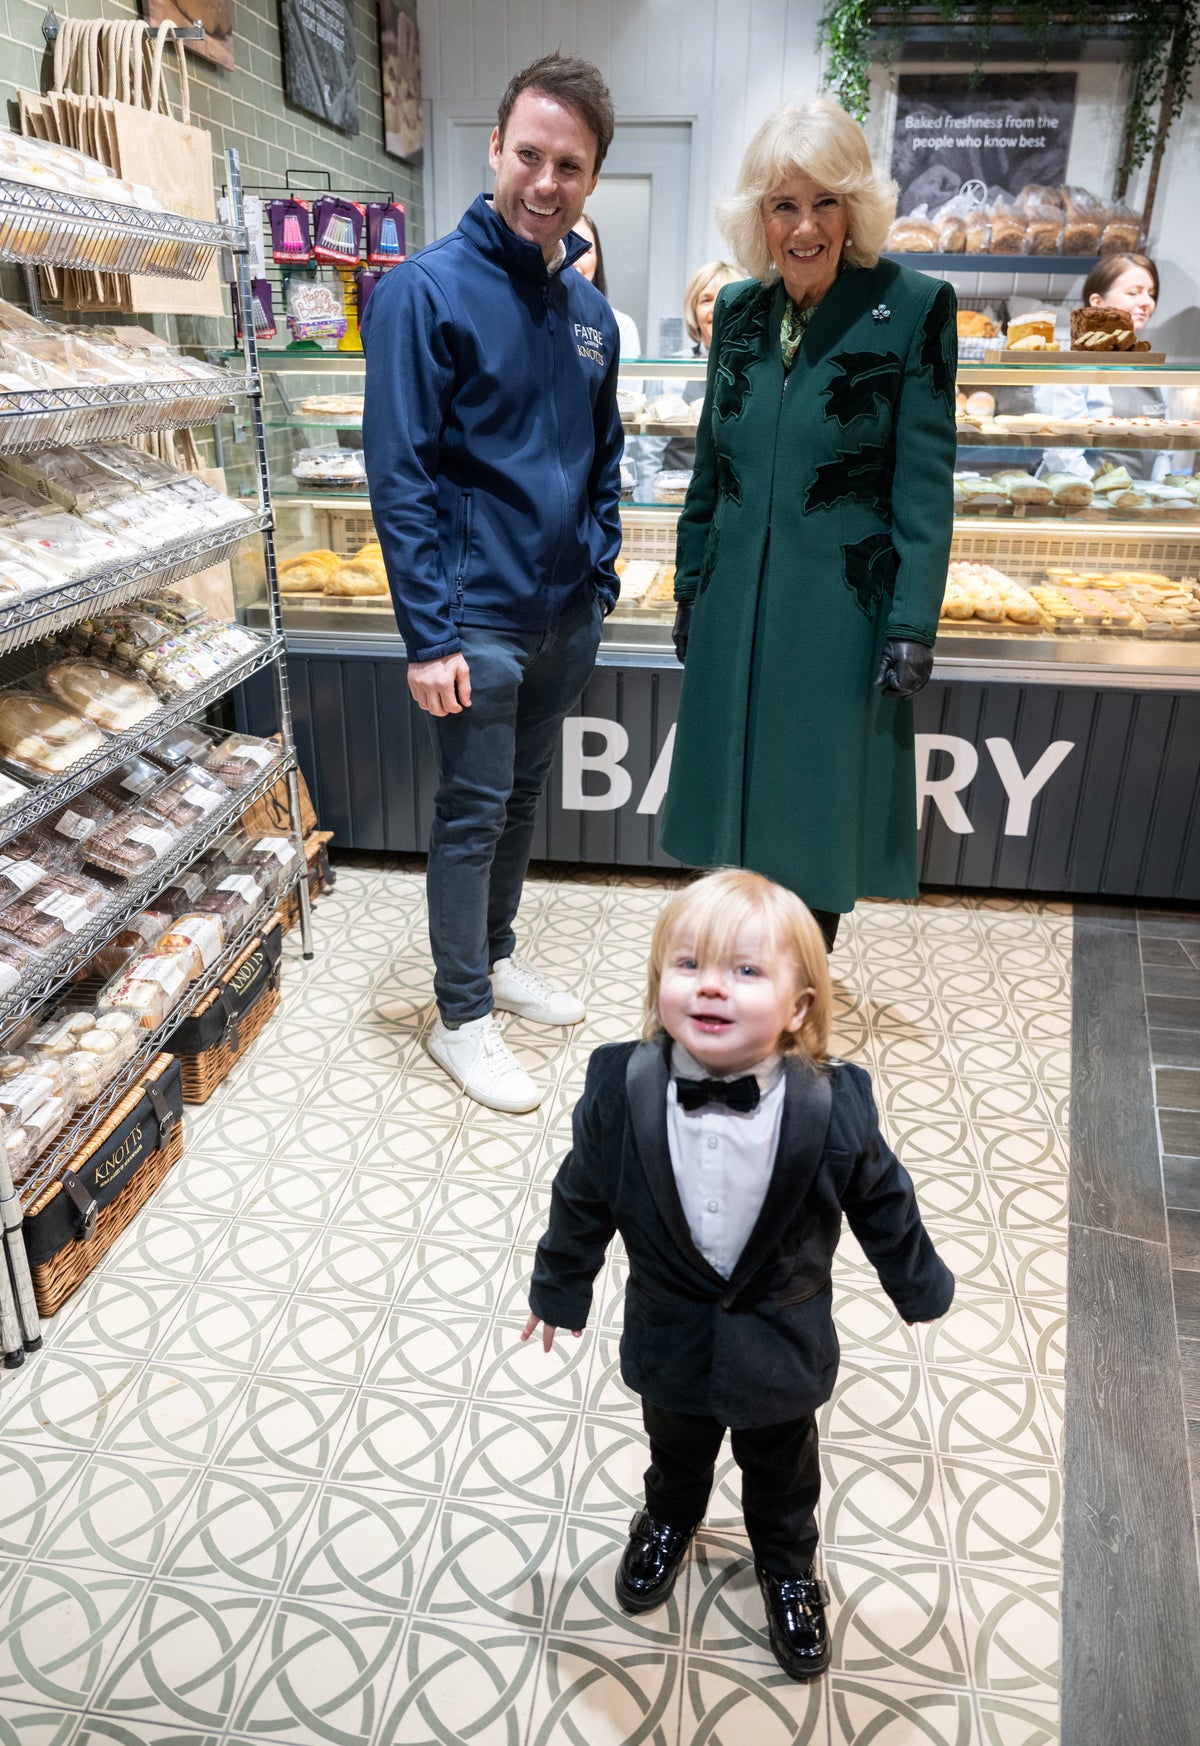 Parents of tuxedo toddler who photobombed Queen on bakery visit reveal Camilla’s response